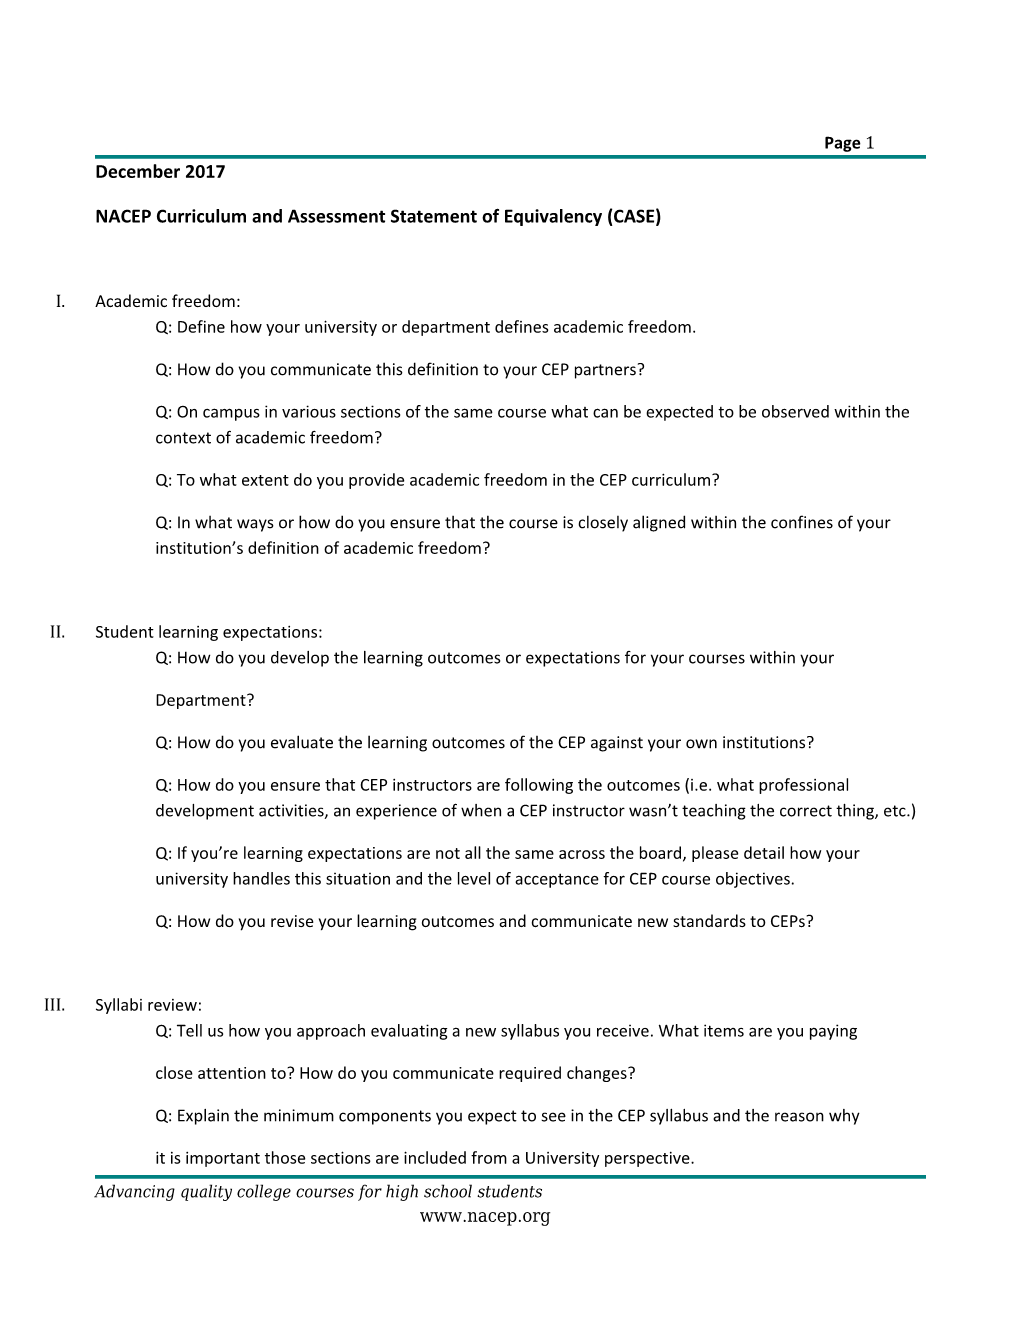 NACEP Curriculum and Assessment Statement of Equivalency (CASE)